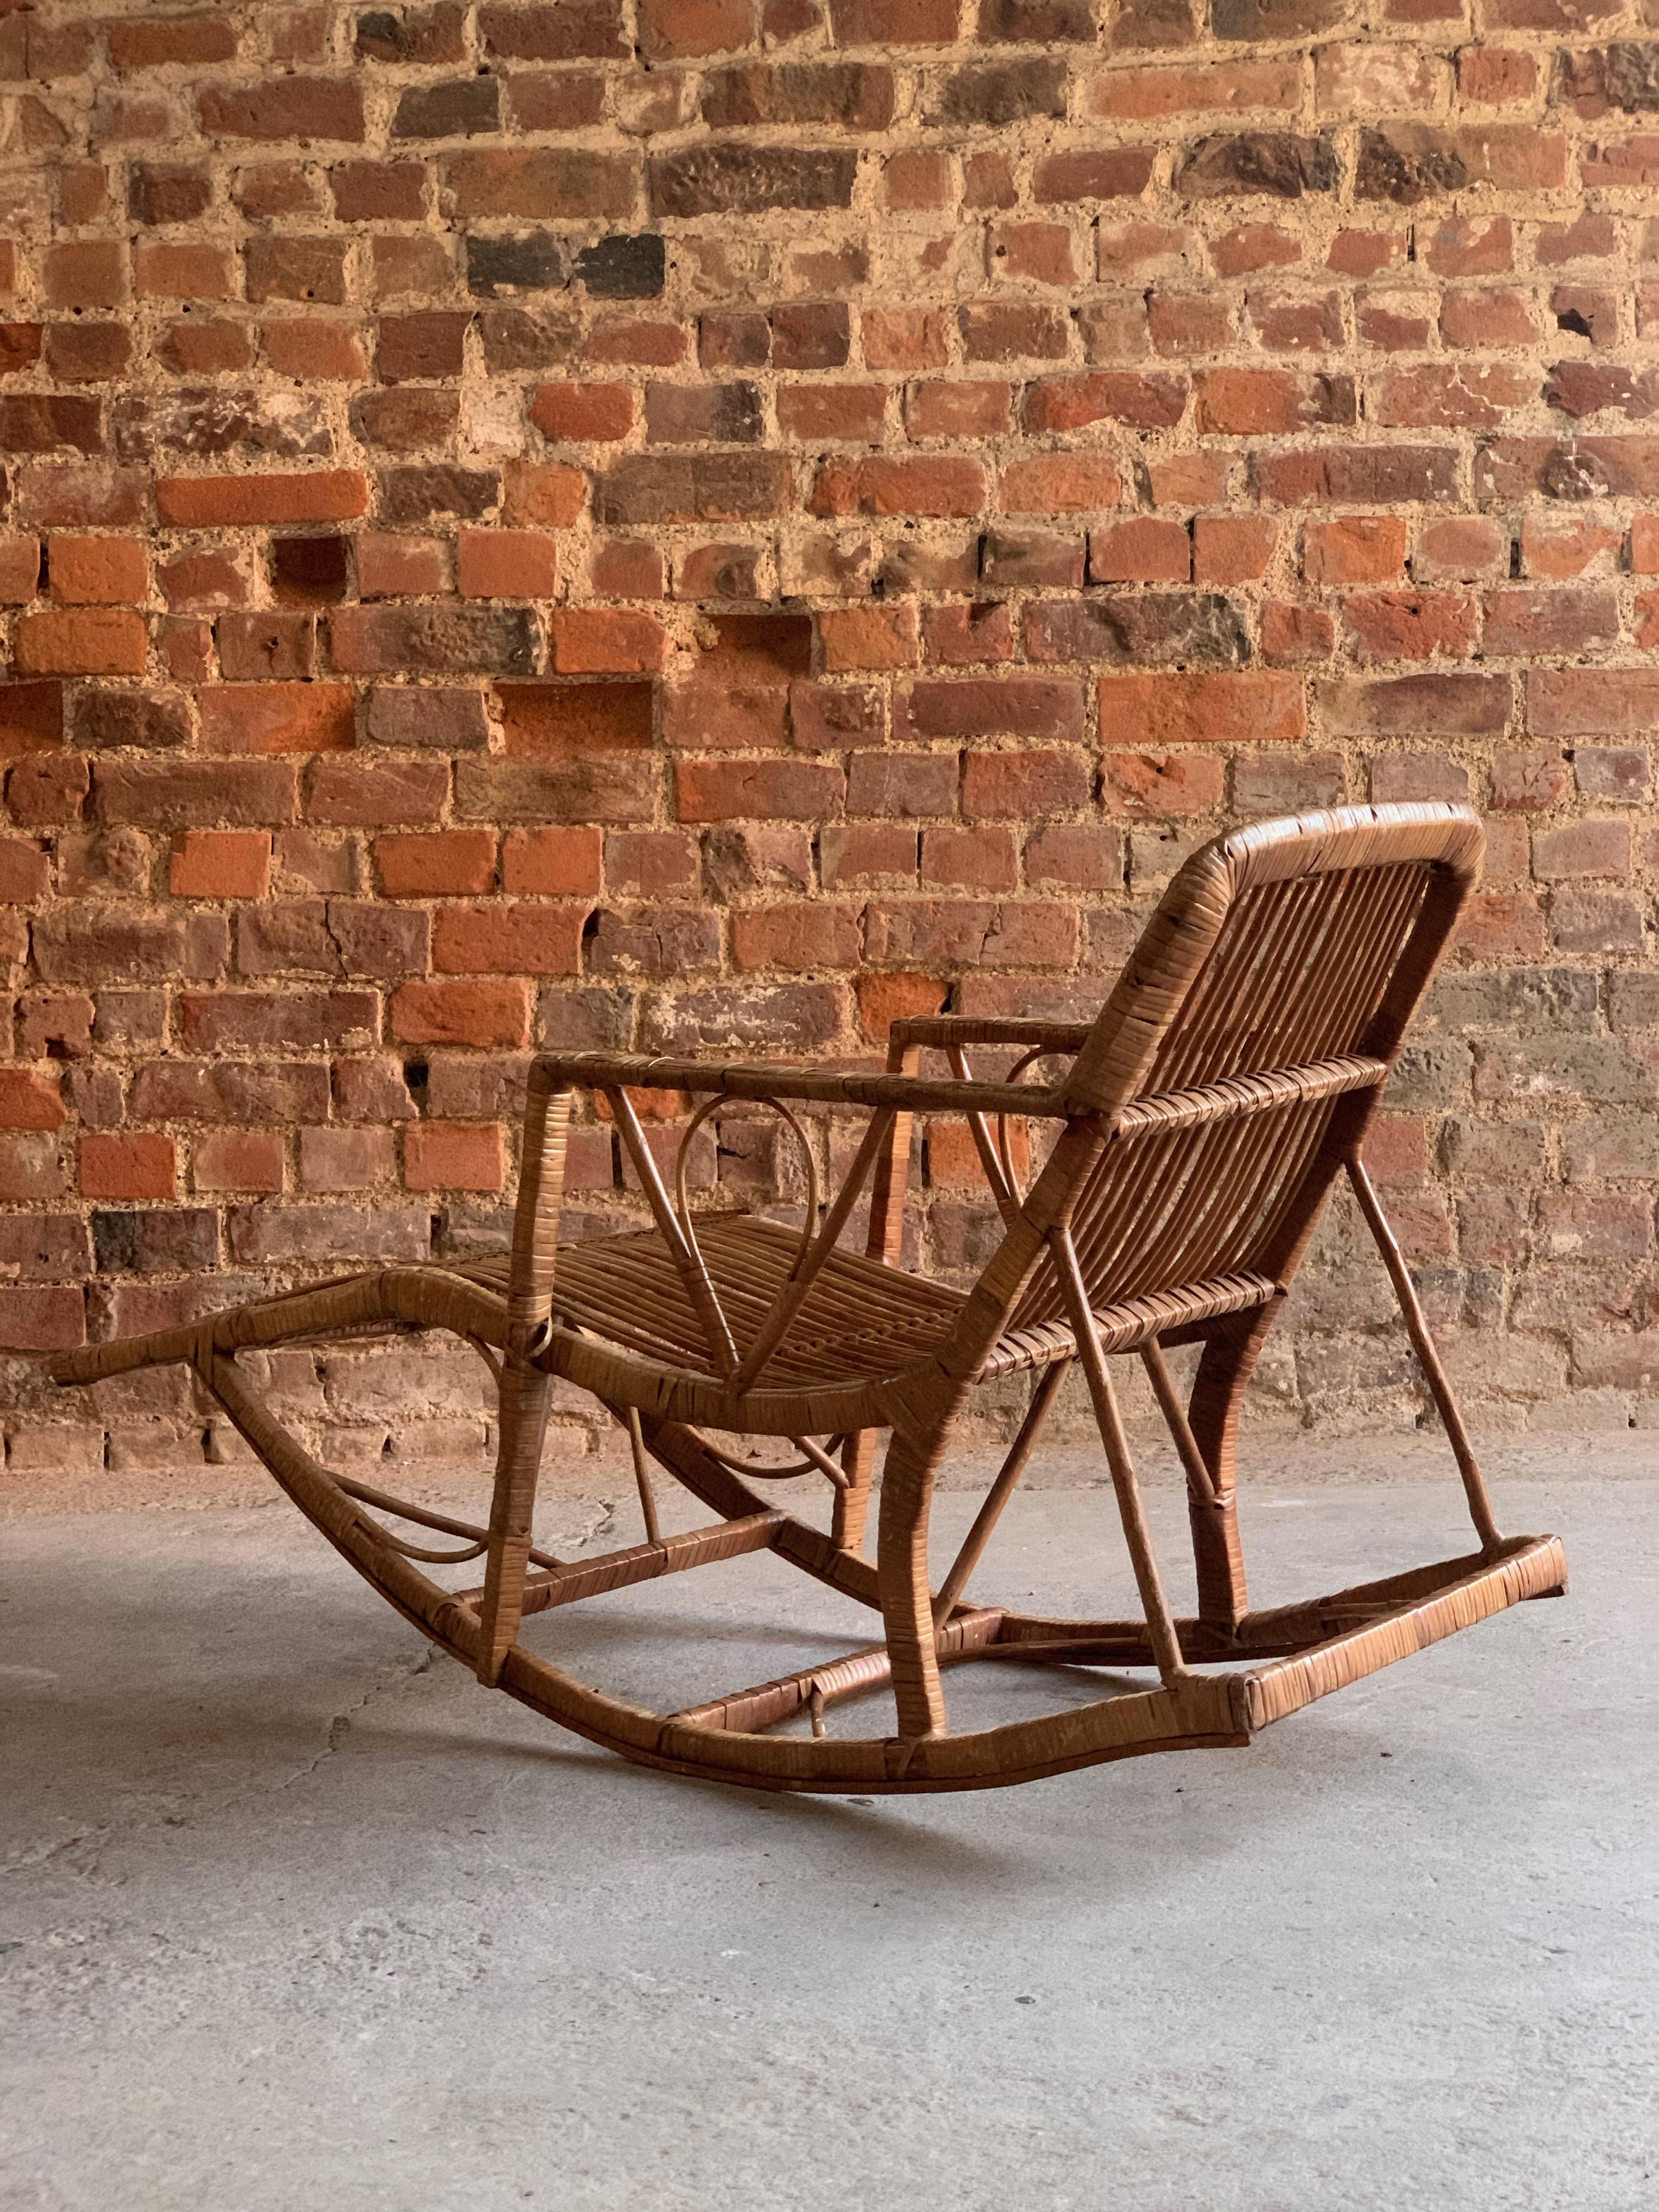 Mid-20th Century Midcentury Rattan Daybed Chaise Longue Rocker Madeira, circa 1950